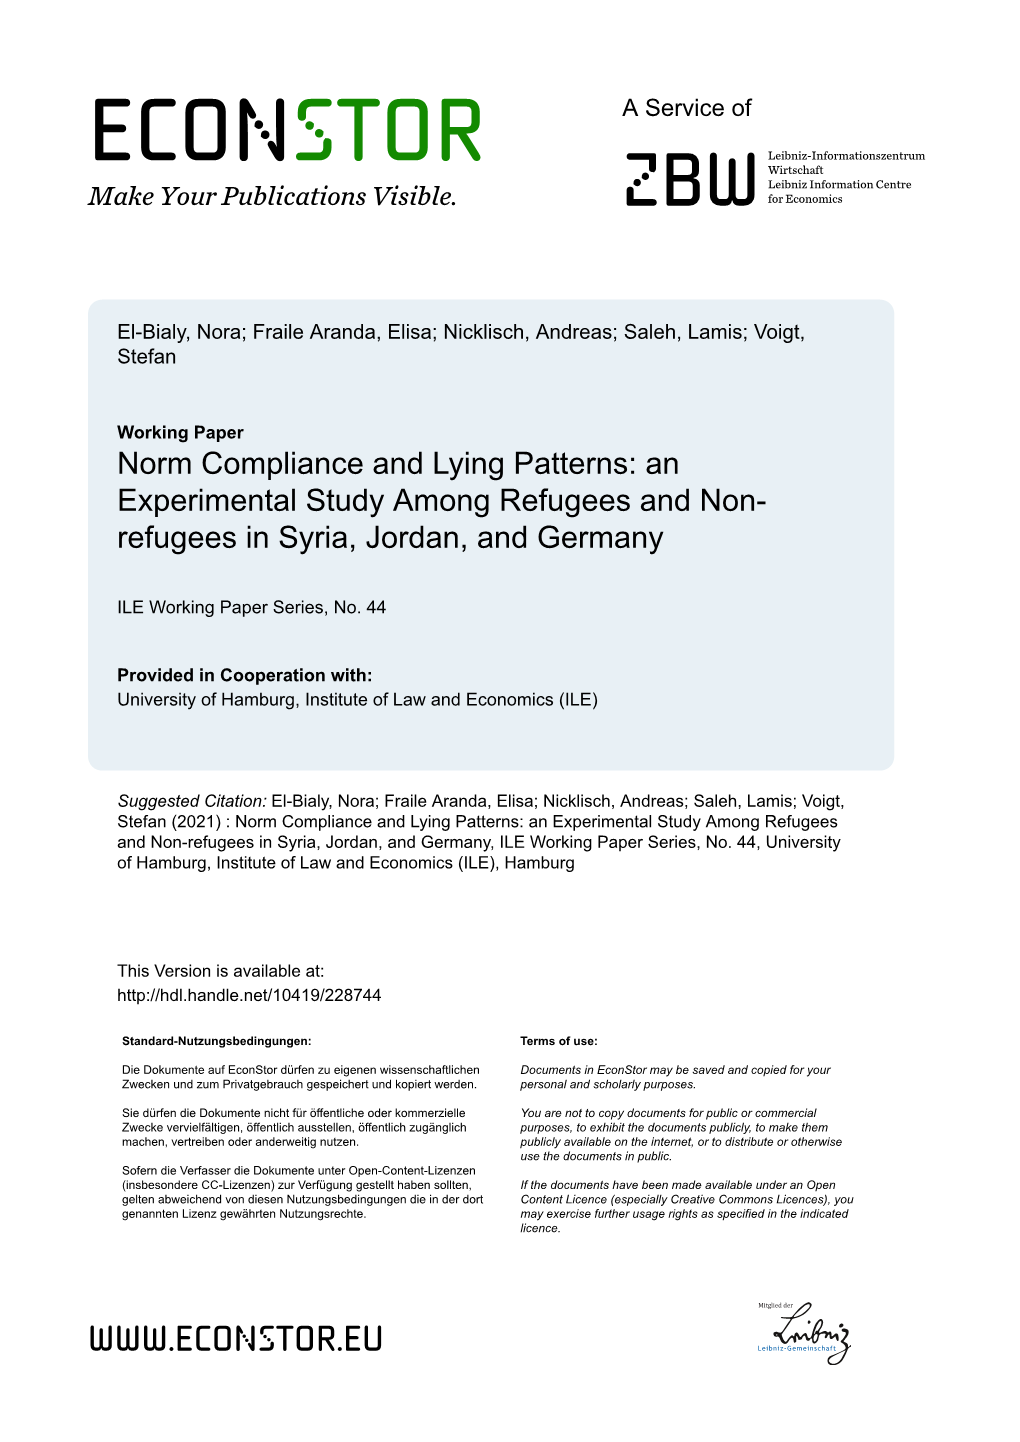 An Experimental Study Among Refugees and Non-Refugees in Syria, Jordan, and Germany, ILE Working Paper Series, No